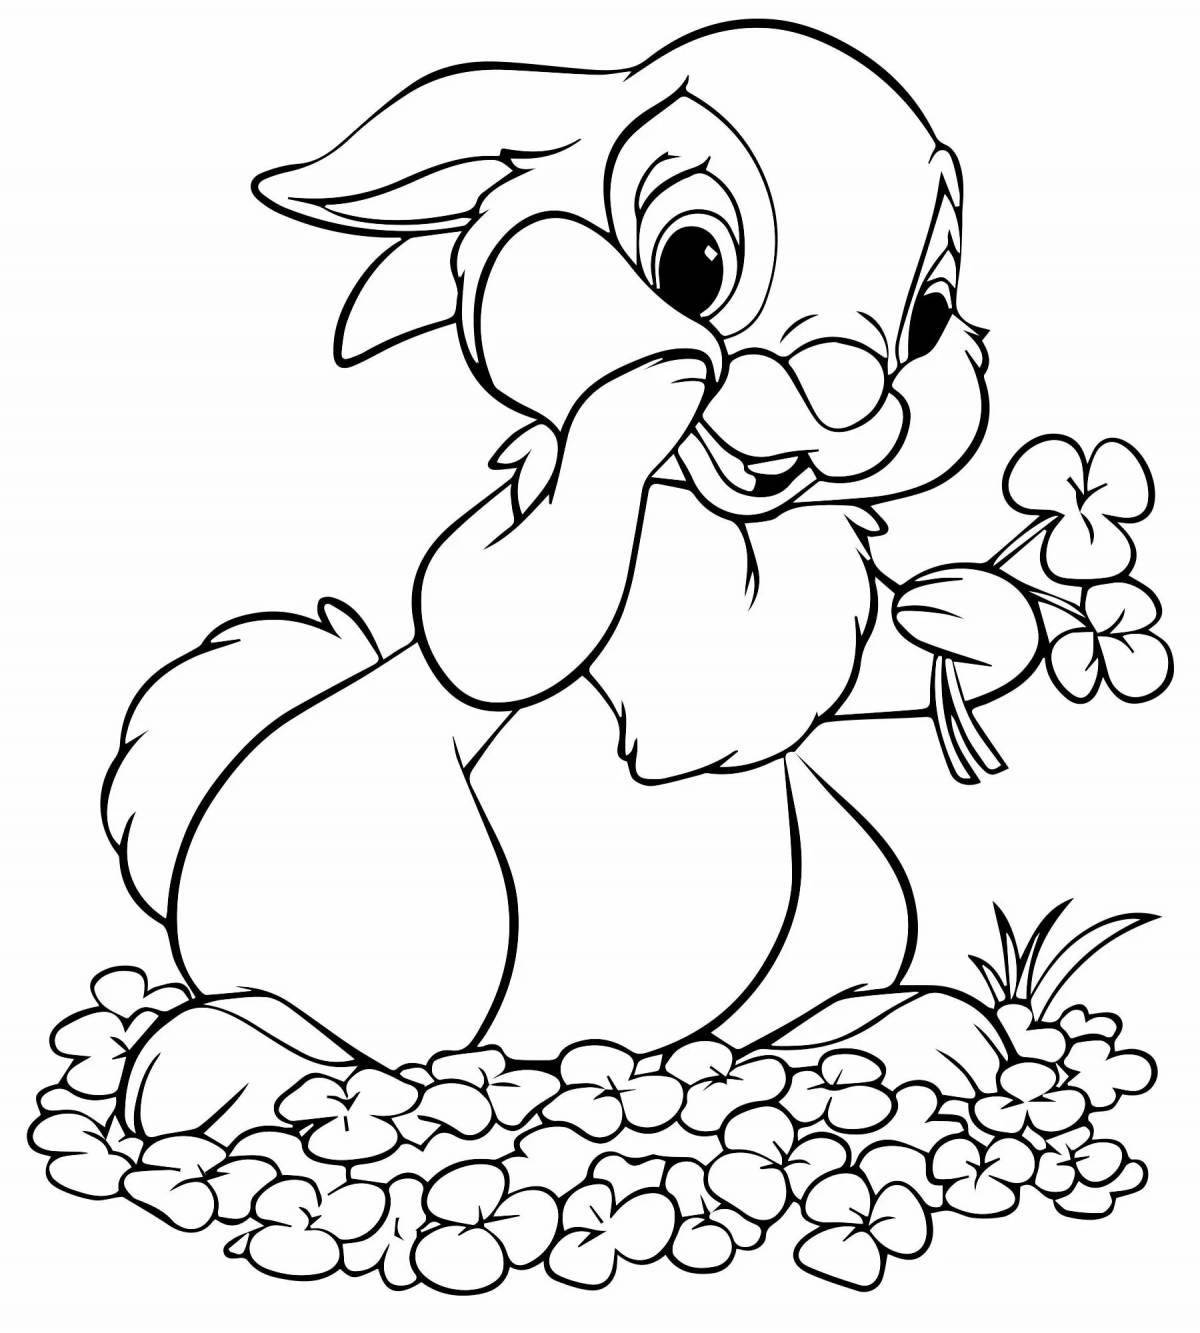 Delightful coloring book rabbit in a dress